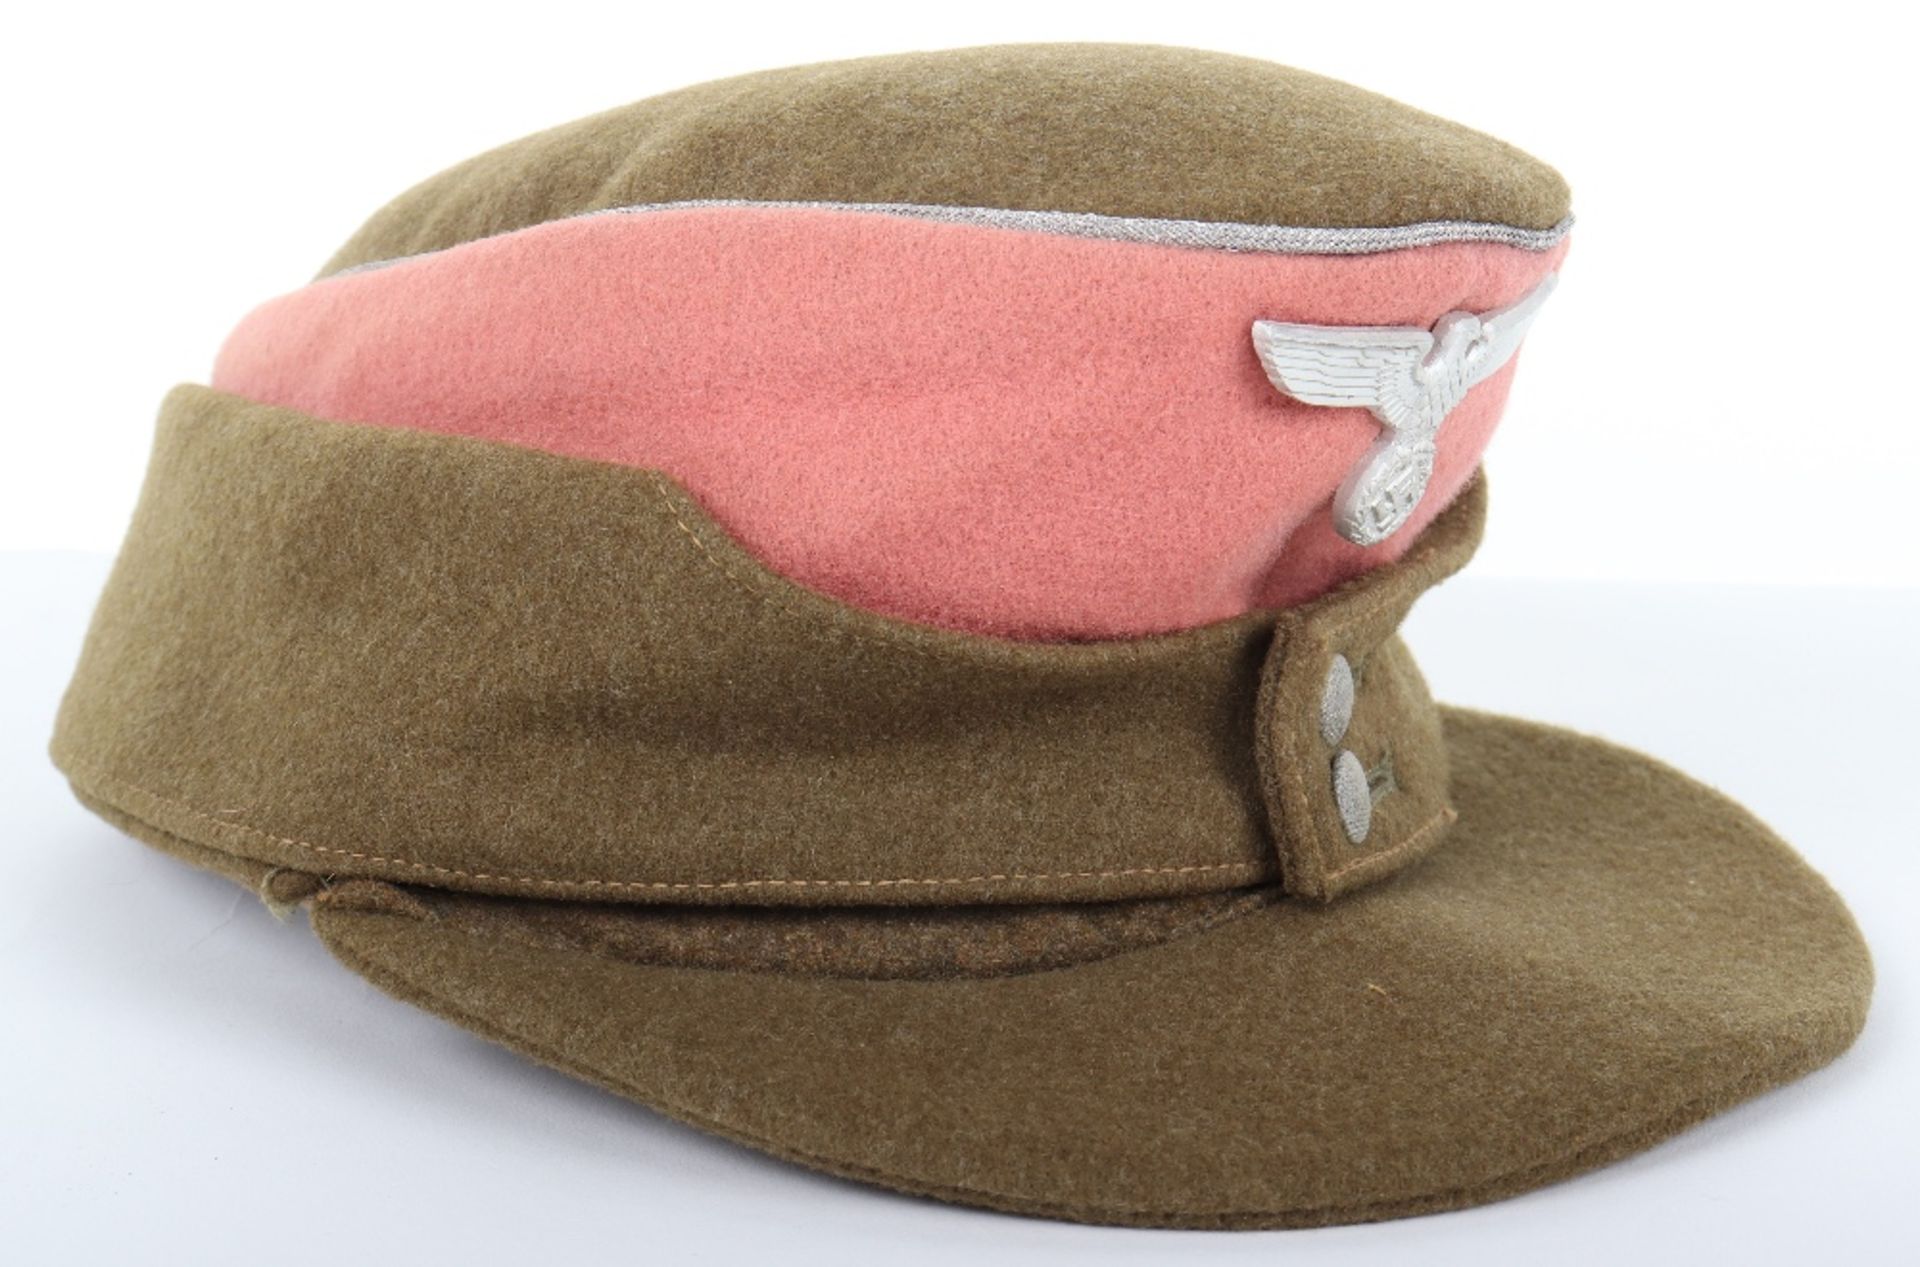 Third Reich SA-Gruppe Alpenland Officers M-43 Ski Cap - Image 3 of 6